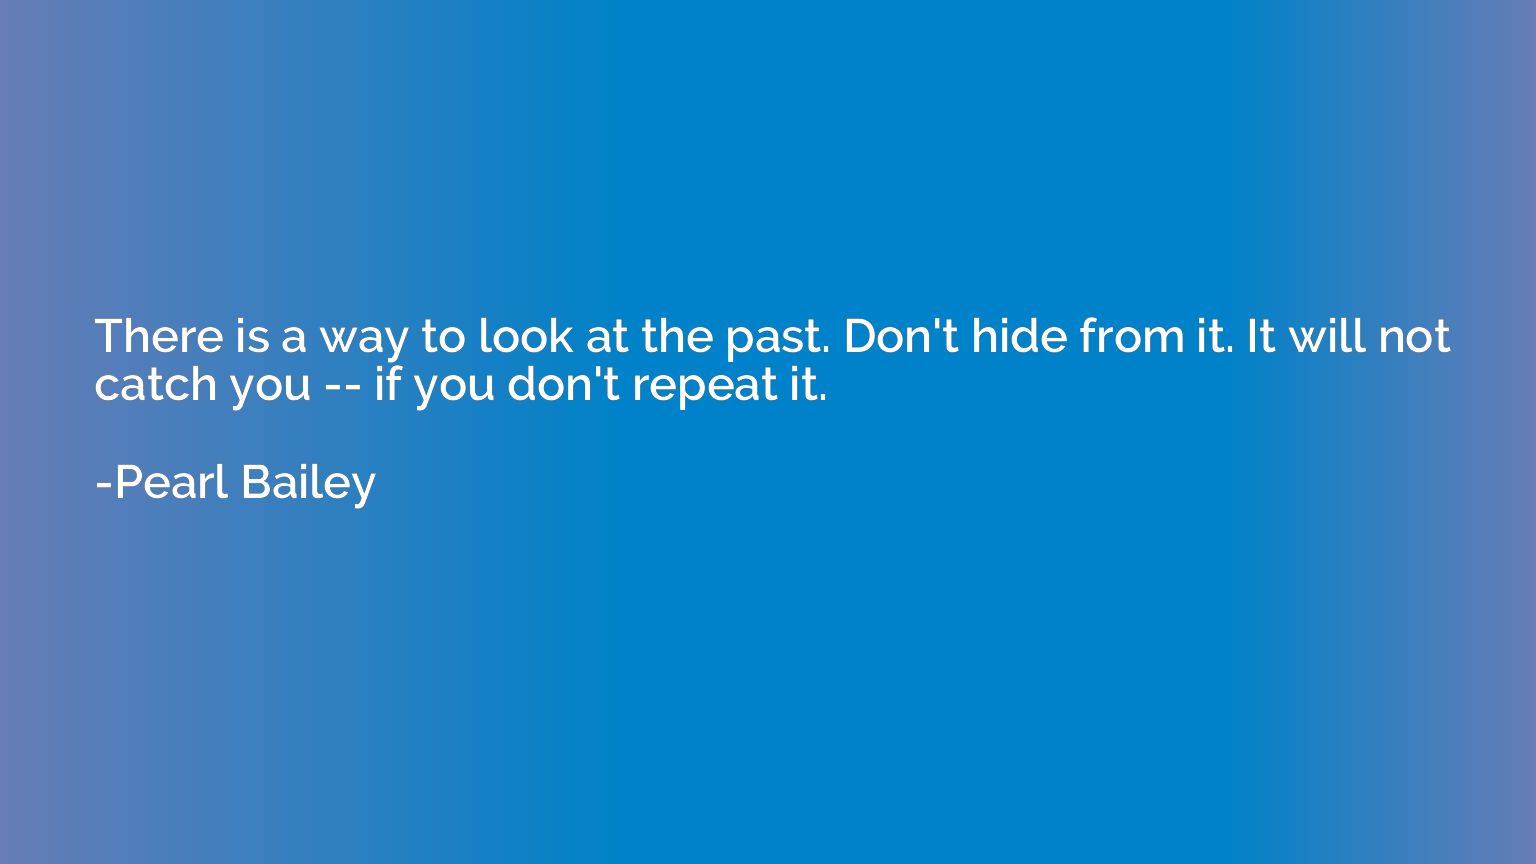 There is a way to look at the past. Don't hide from it. It w